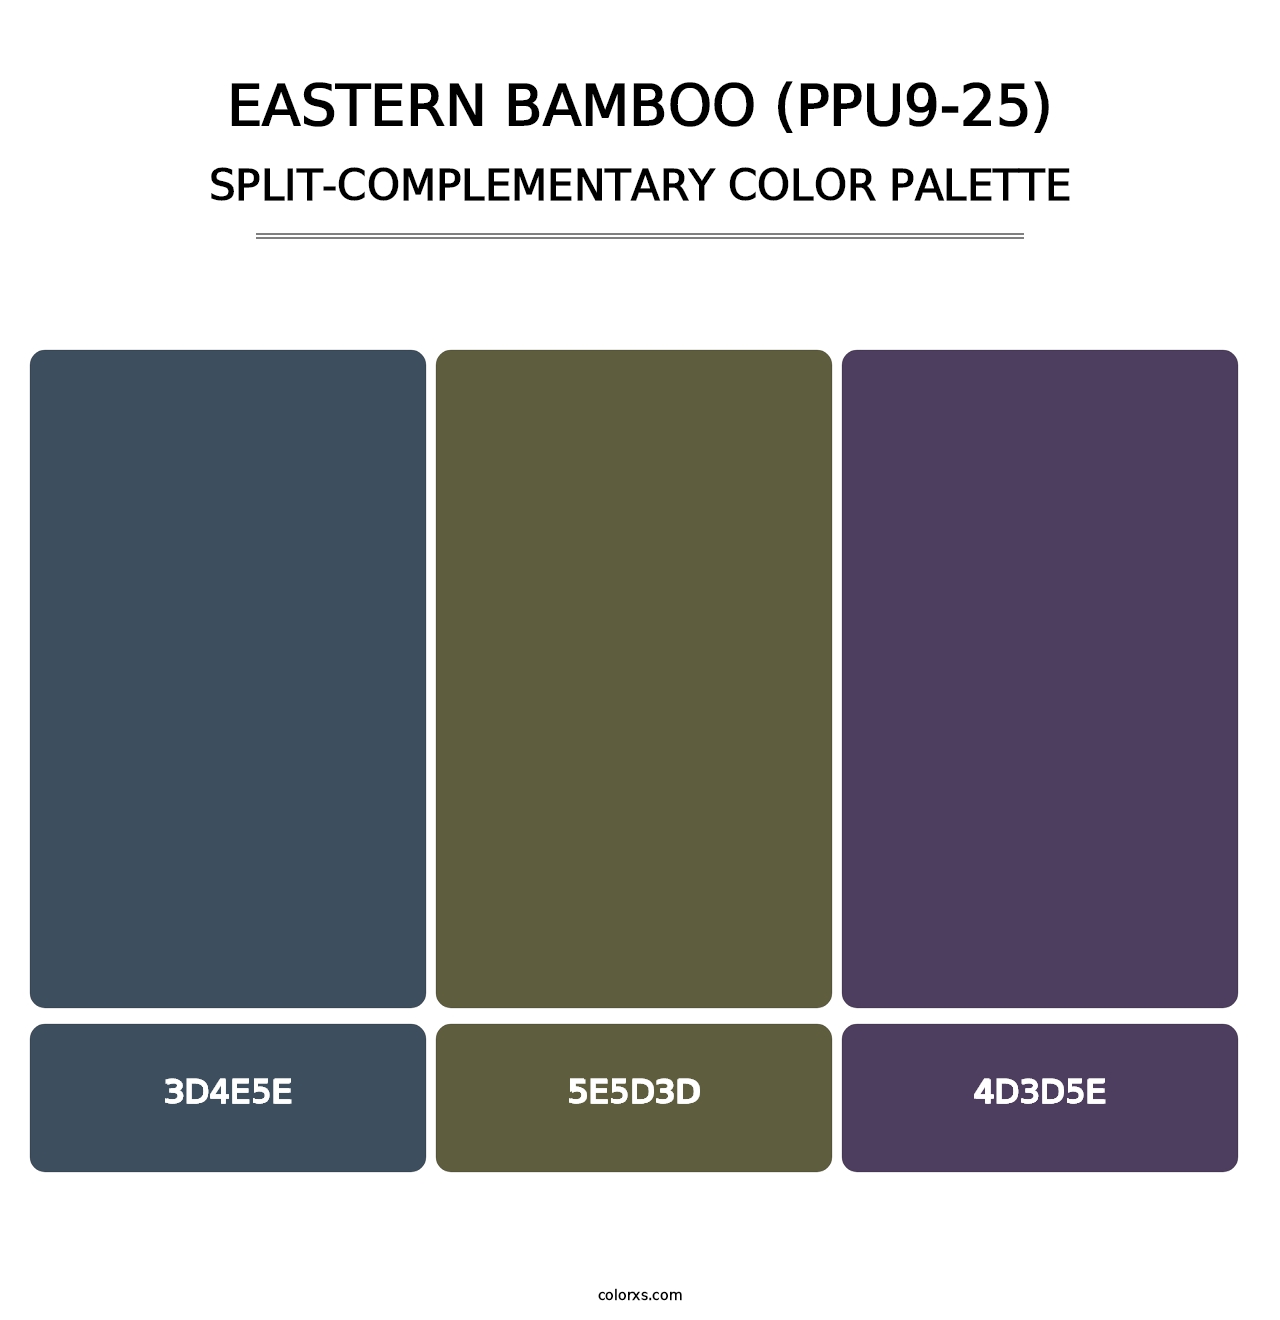 Eastern Bamboo (PPU9-25) - Split-Complementary Color Palette